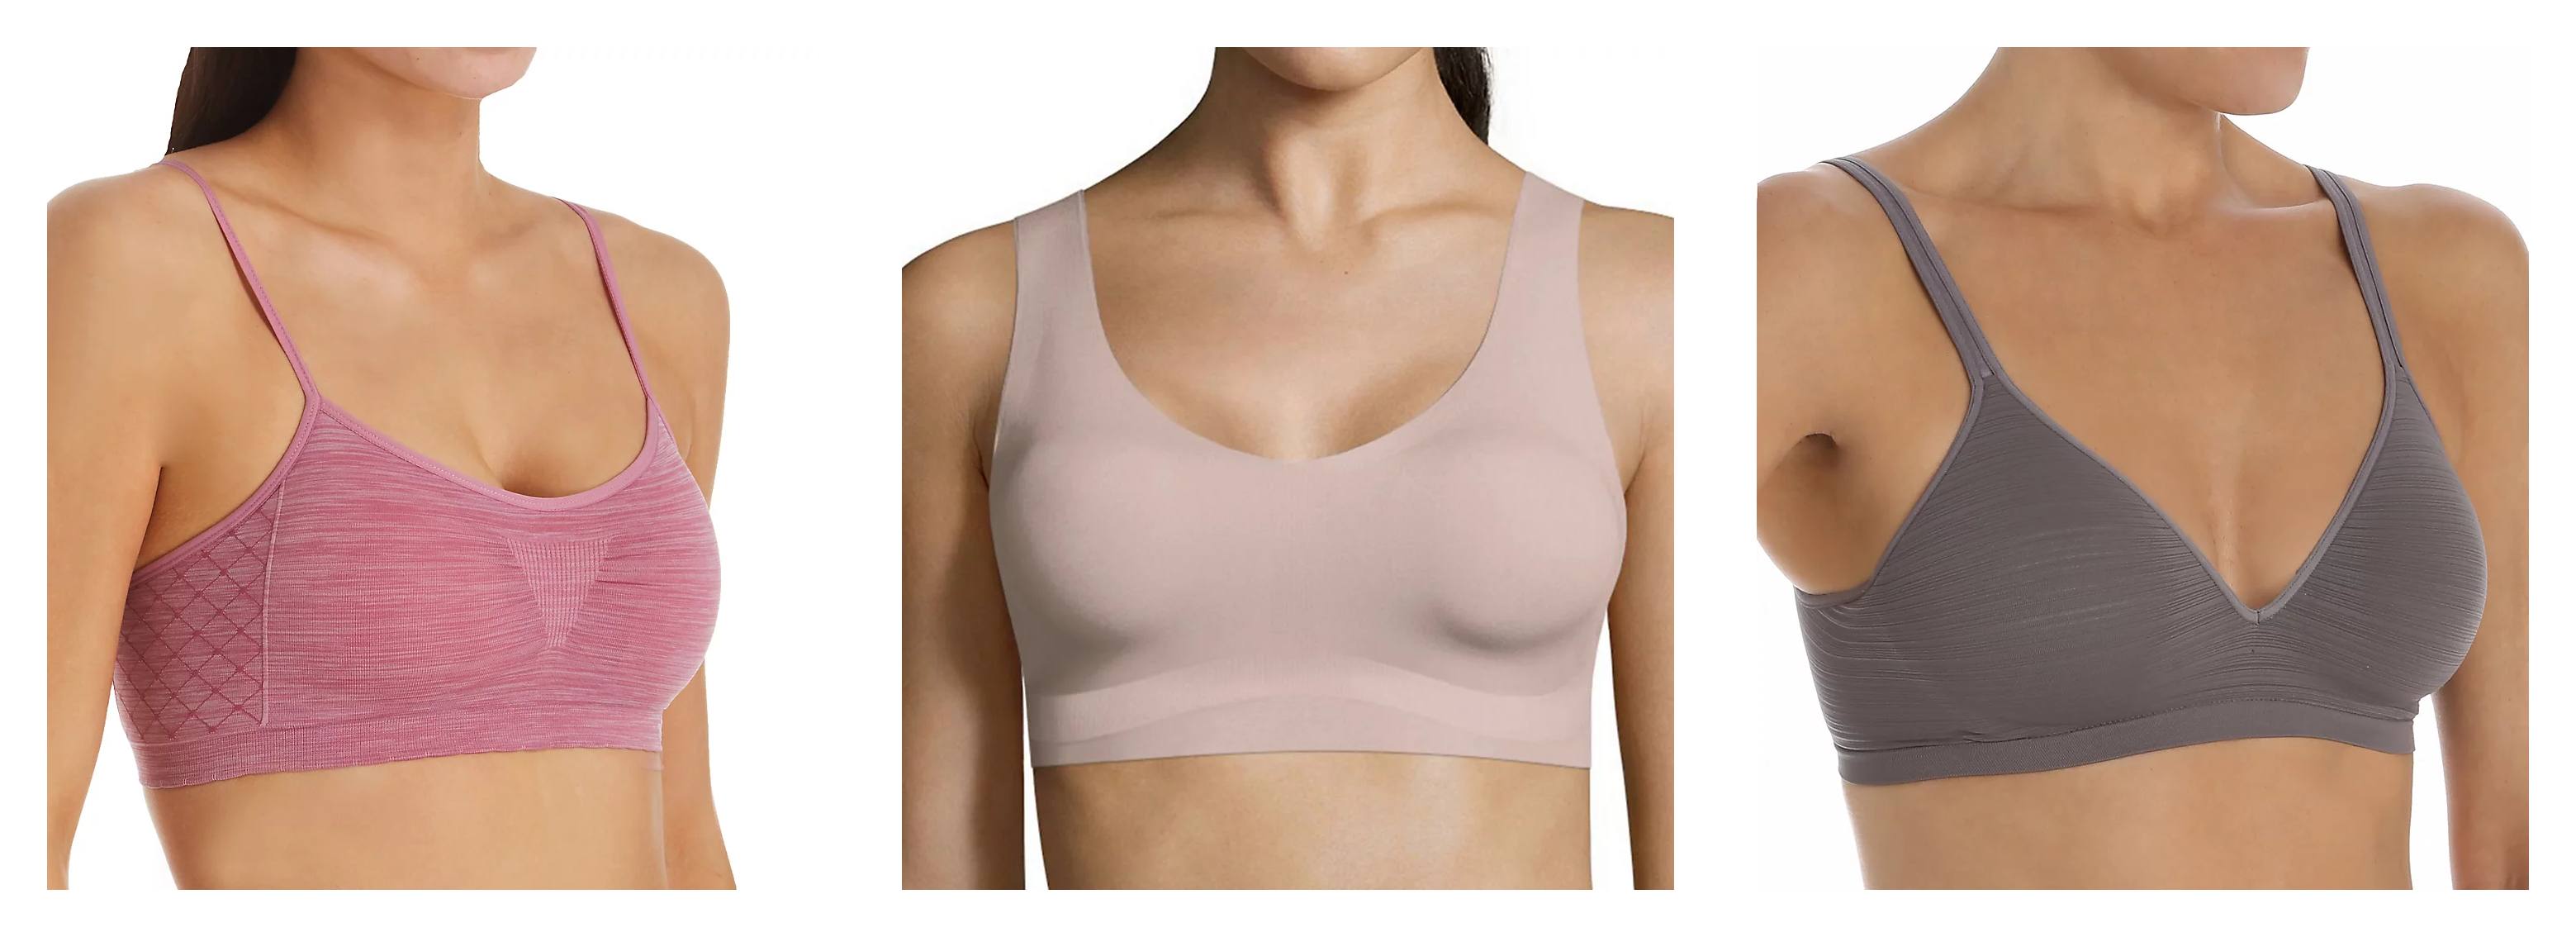 Preteen Padded Bras - The Helpful How To Guide